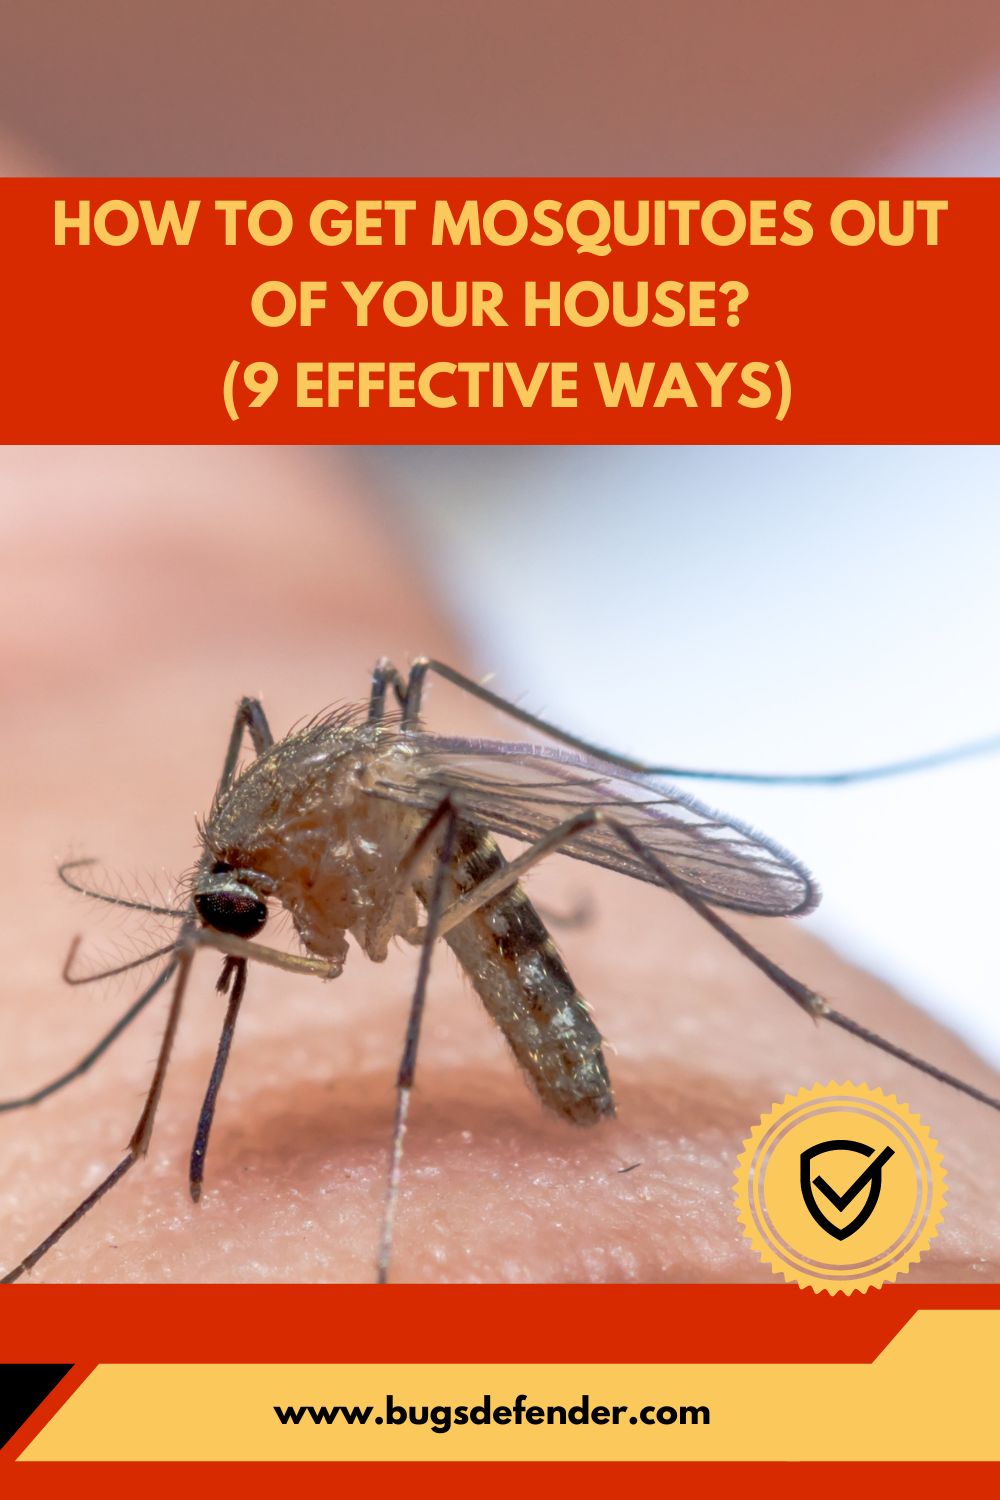 How To Get Mosquitoes Out Of Your House pin1